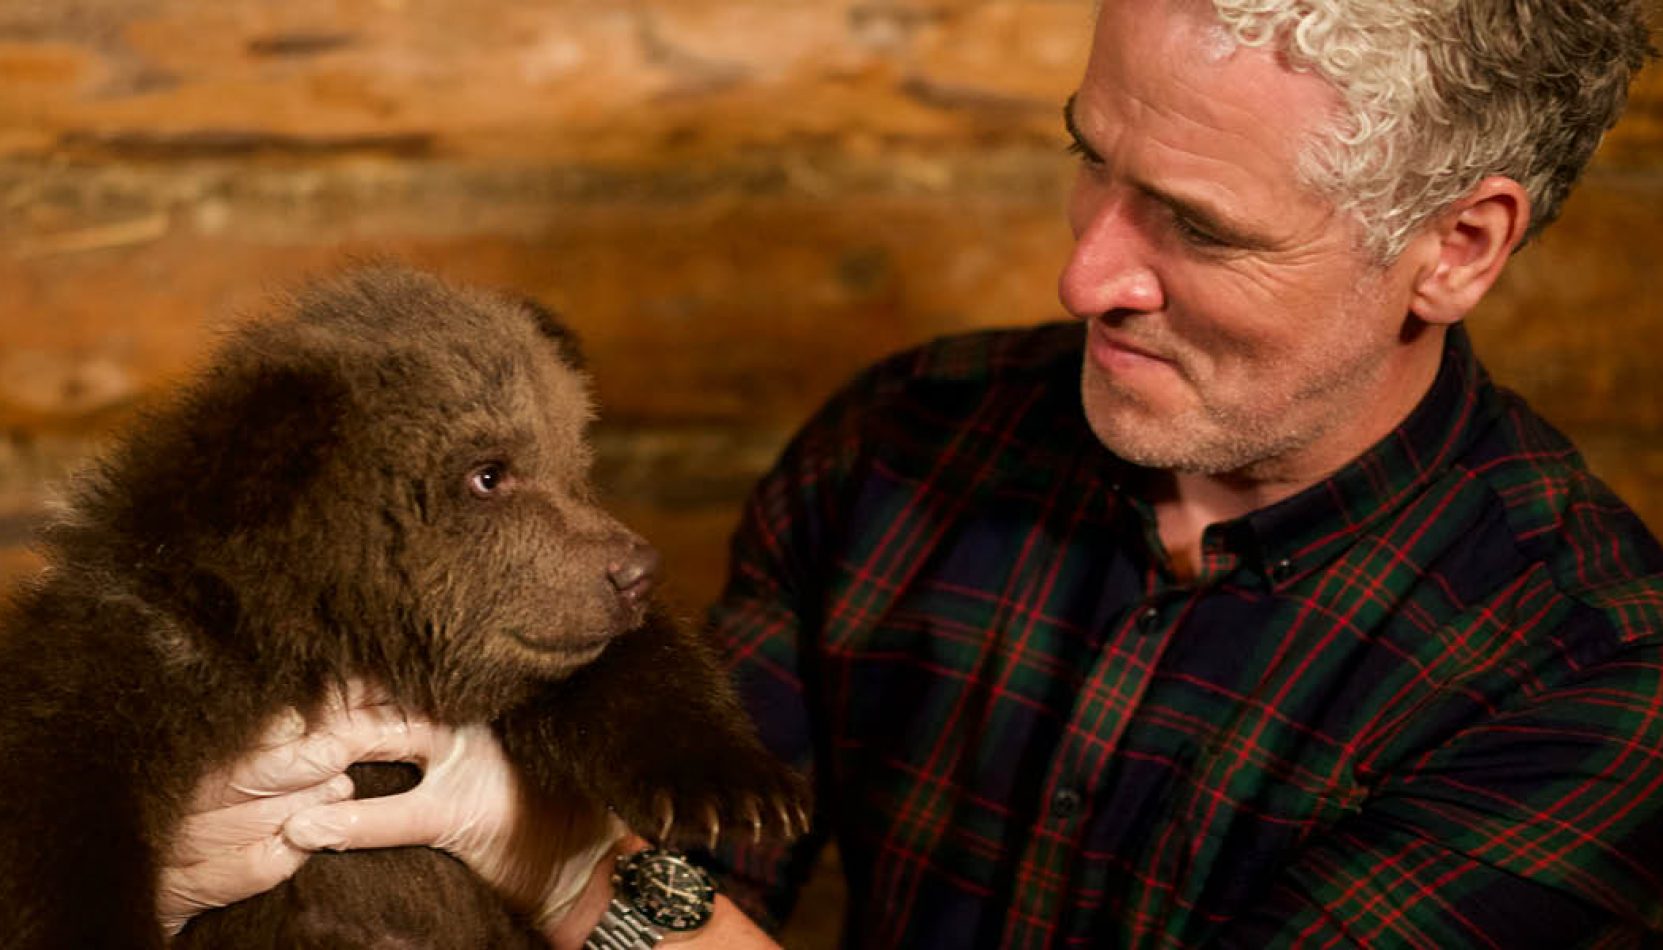 gordon buchanan, wildlife, nature, talk, g live, guildford, surrey, whats on, guide to whats on, guide to going out, going out, nights out, things to do, conservation